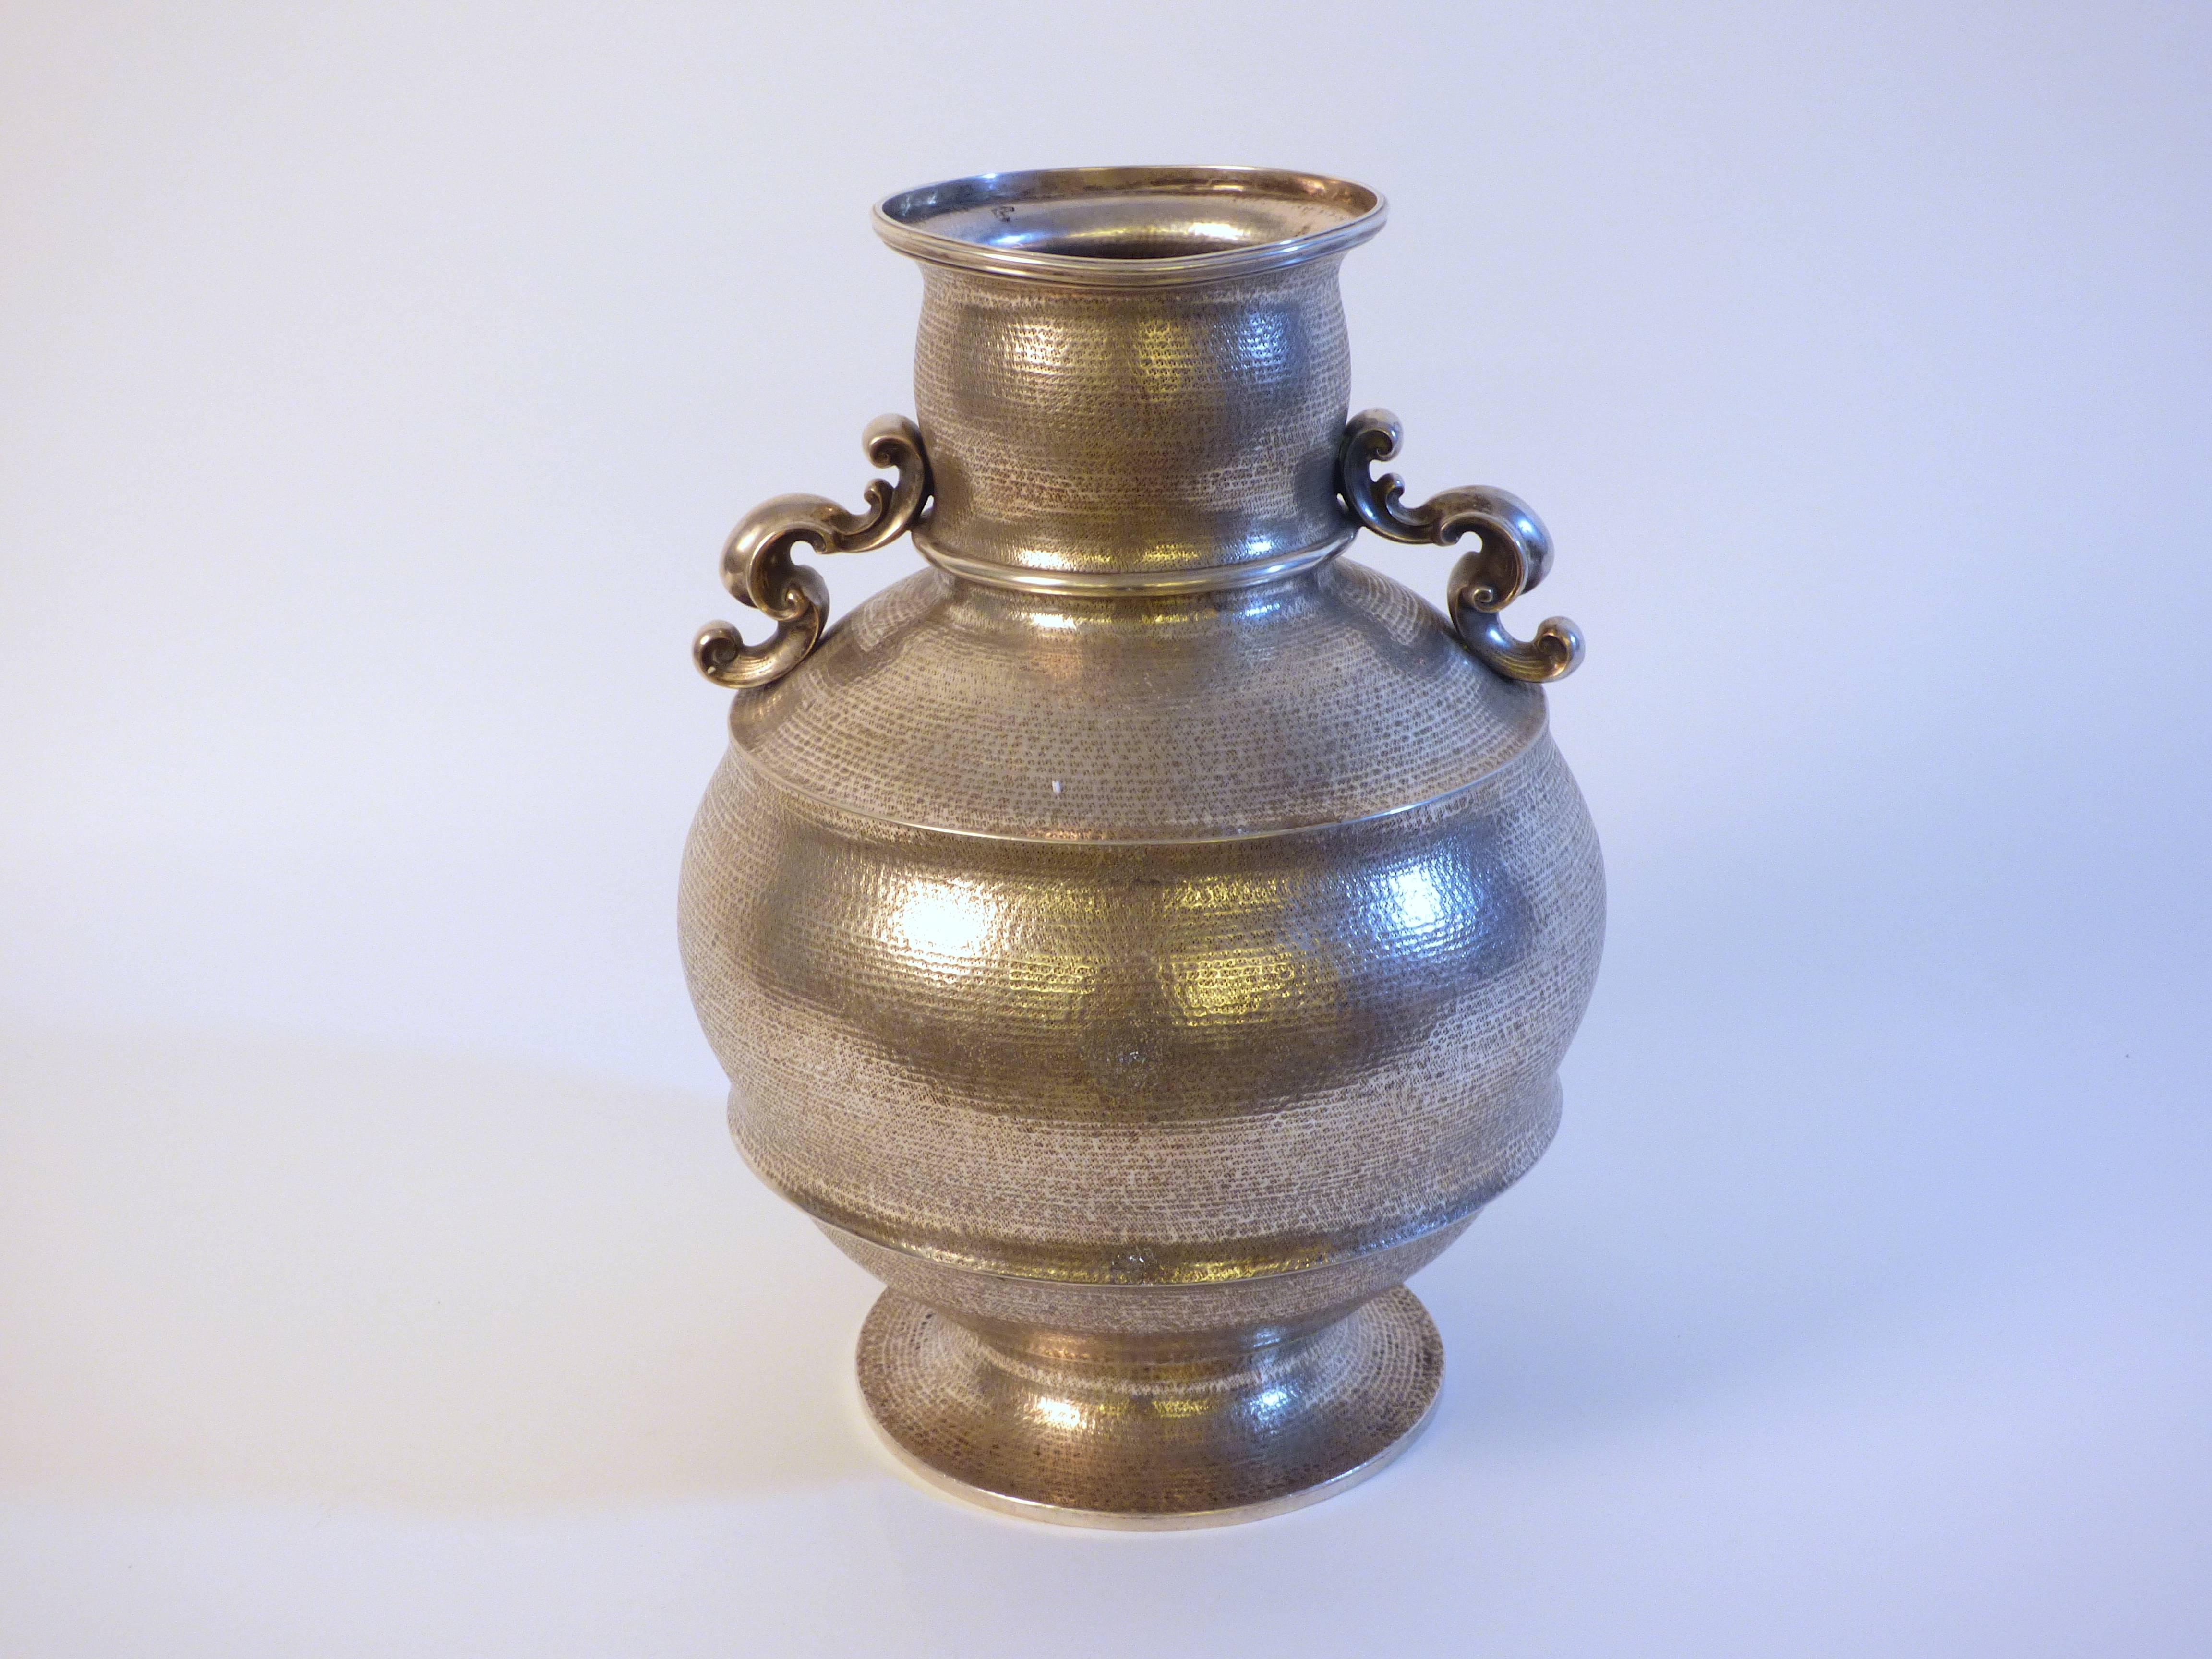 A beautiful silver vase produced by Ansuini, Roma in circa 1930. Signed.
Weight 1700 g.